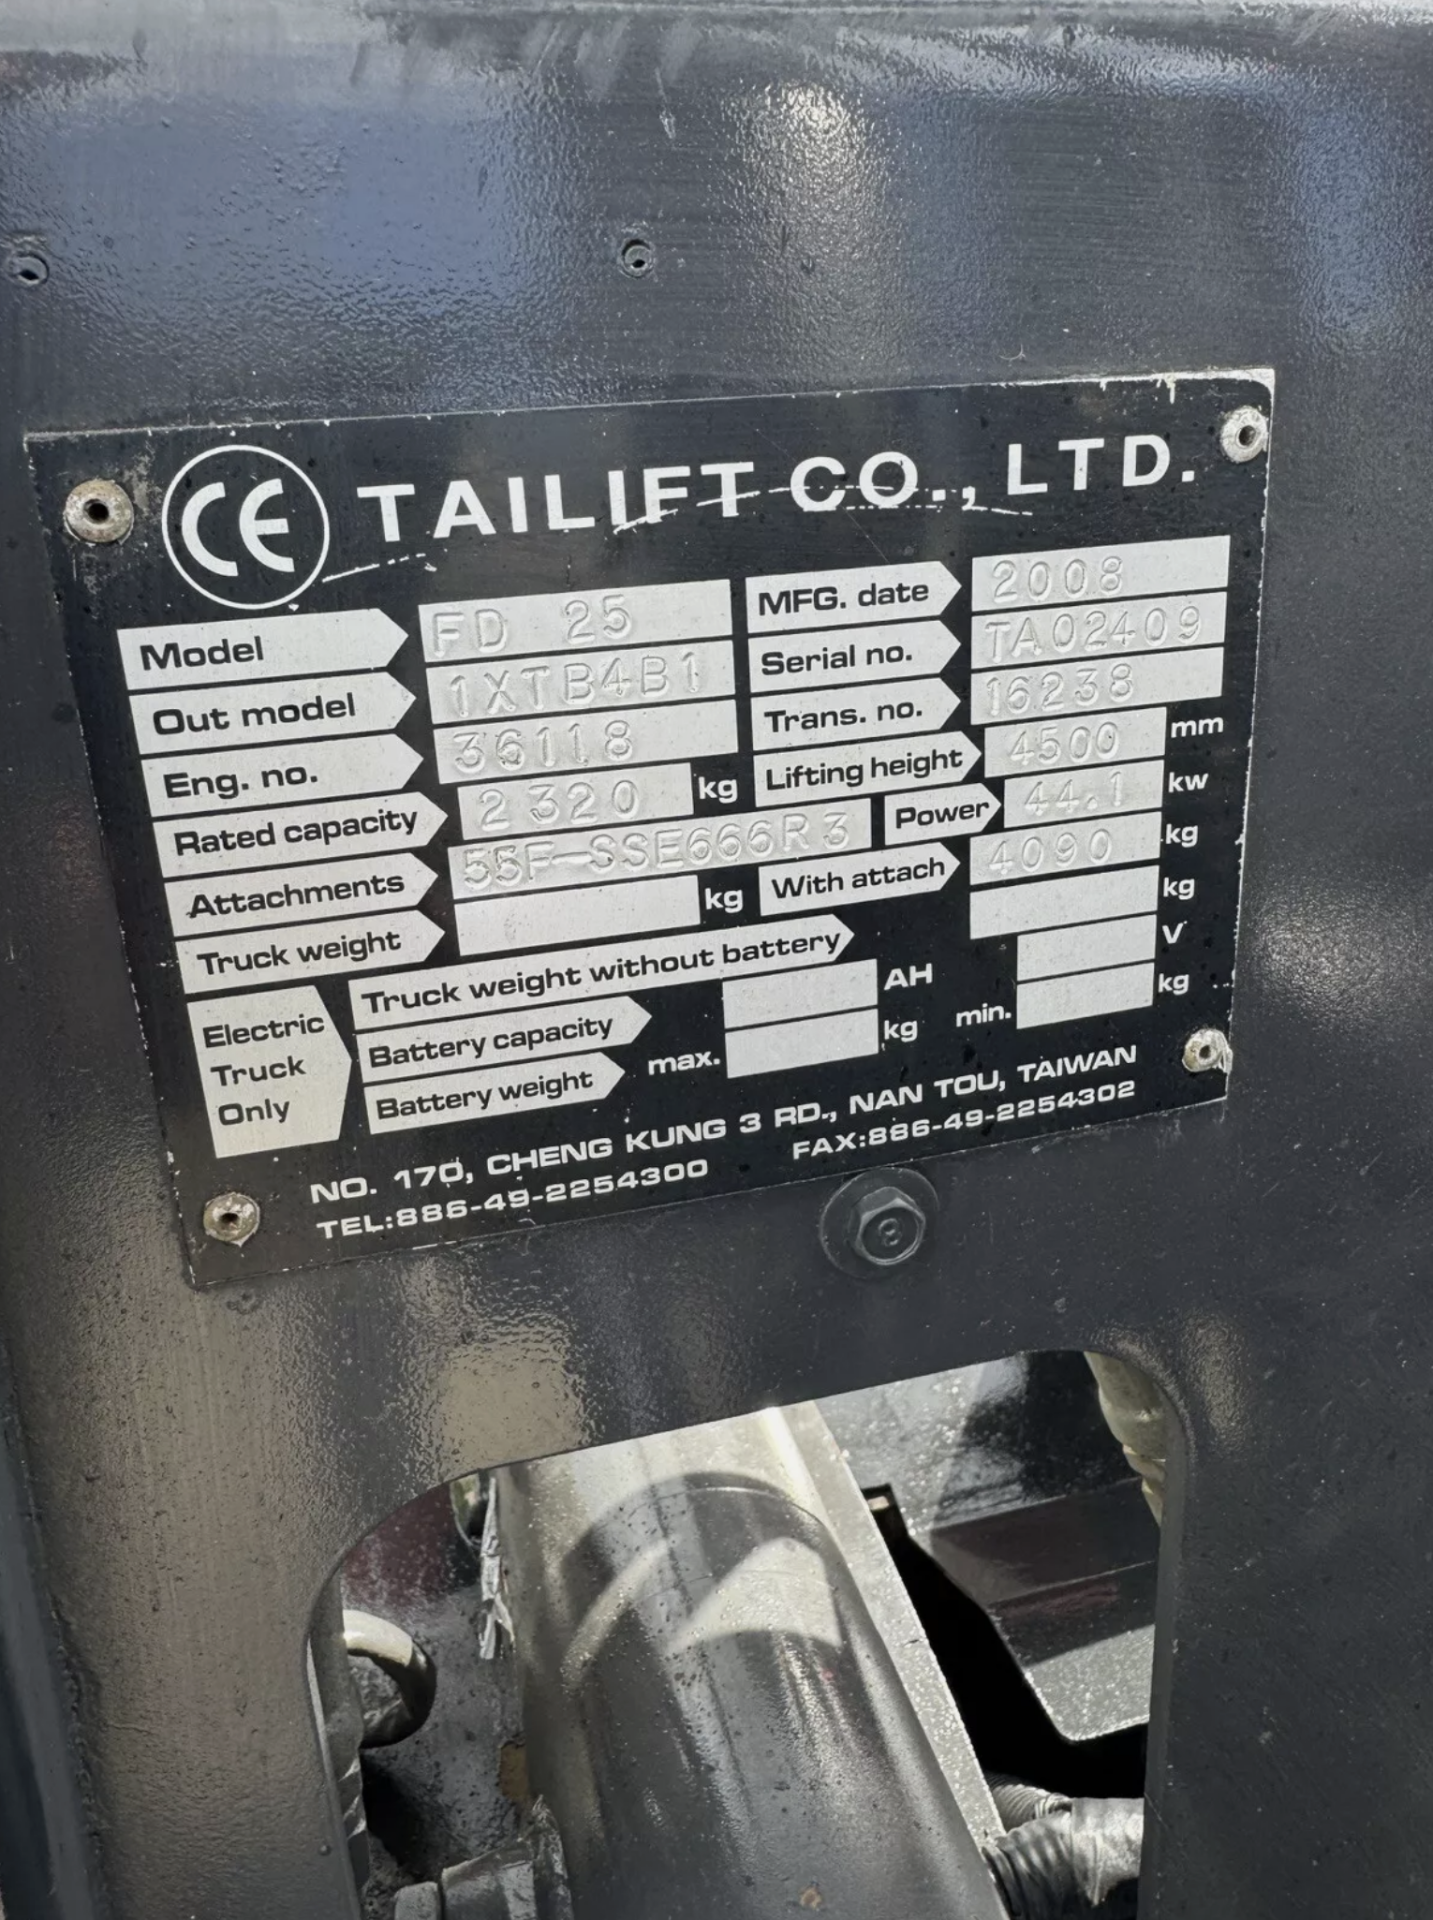 Tail Lift 2.5 Diesel Forklift Truck (container spec) - Image 4 of 8